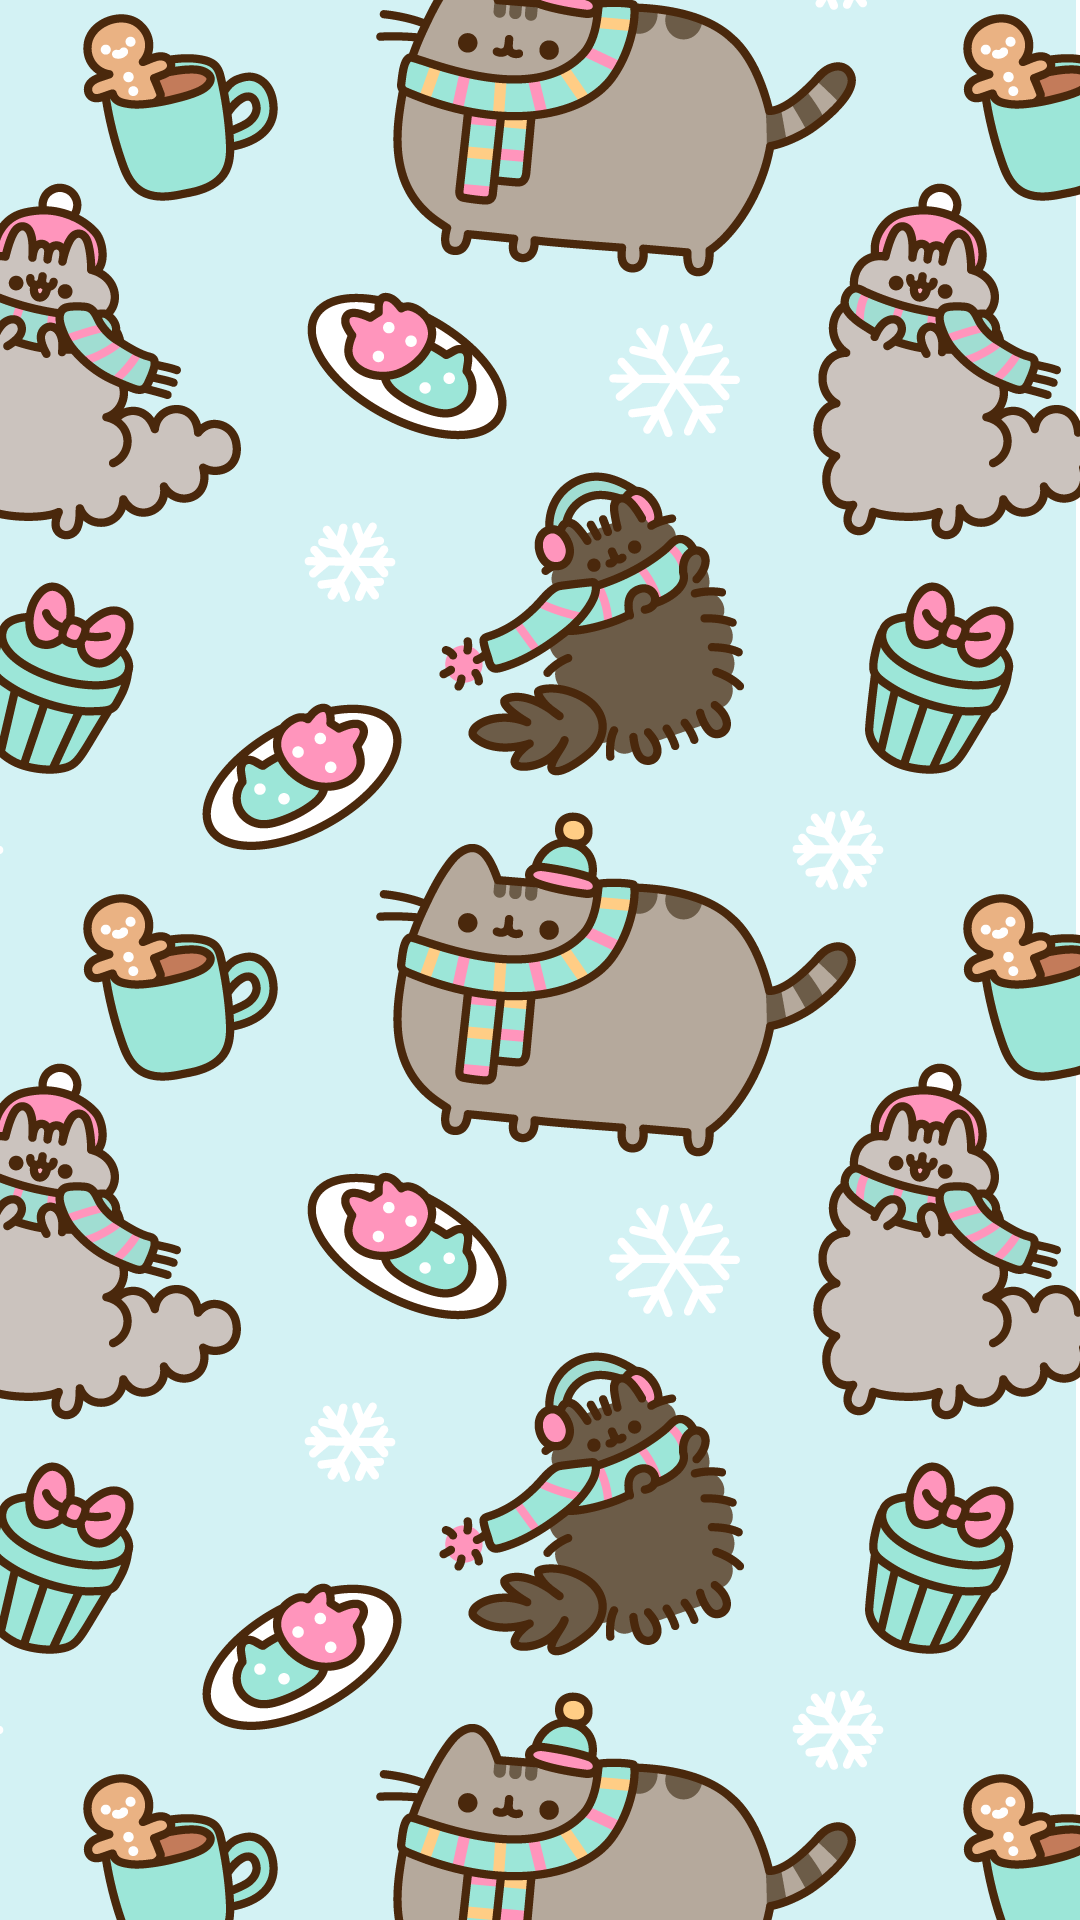 FREE Exclusive Pusheen Android and iPhone® Christmas Wallpaper - #ClairesBlog. Wallpaper iphone christmas, Cute christmas wallpaper, Pusheen christmas